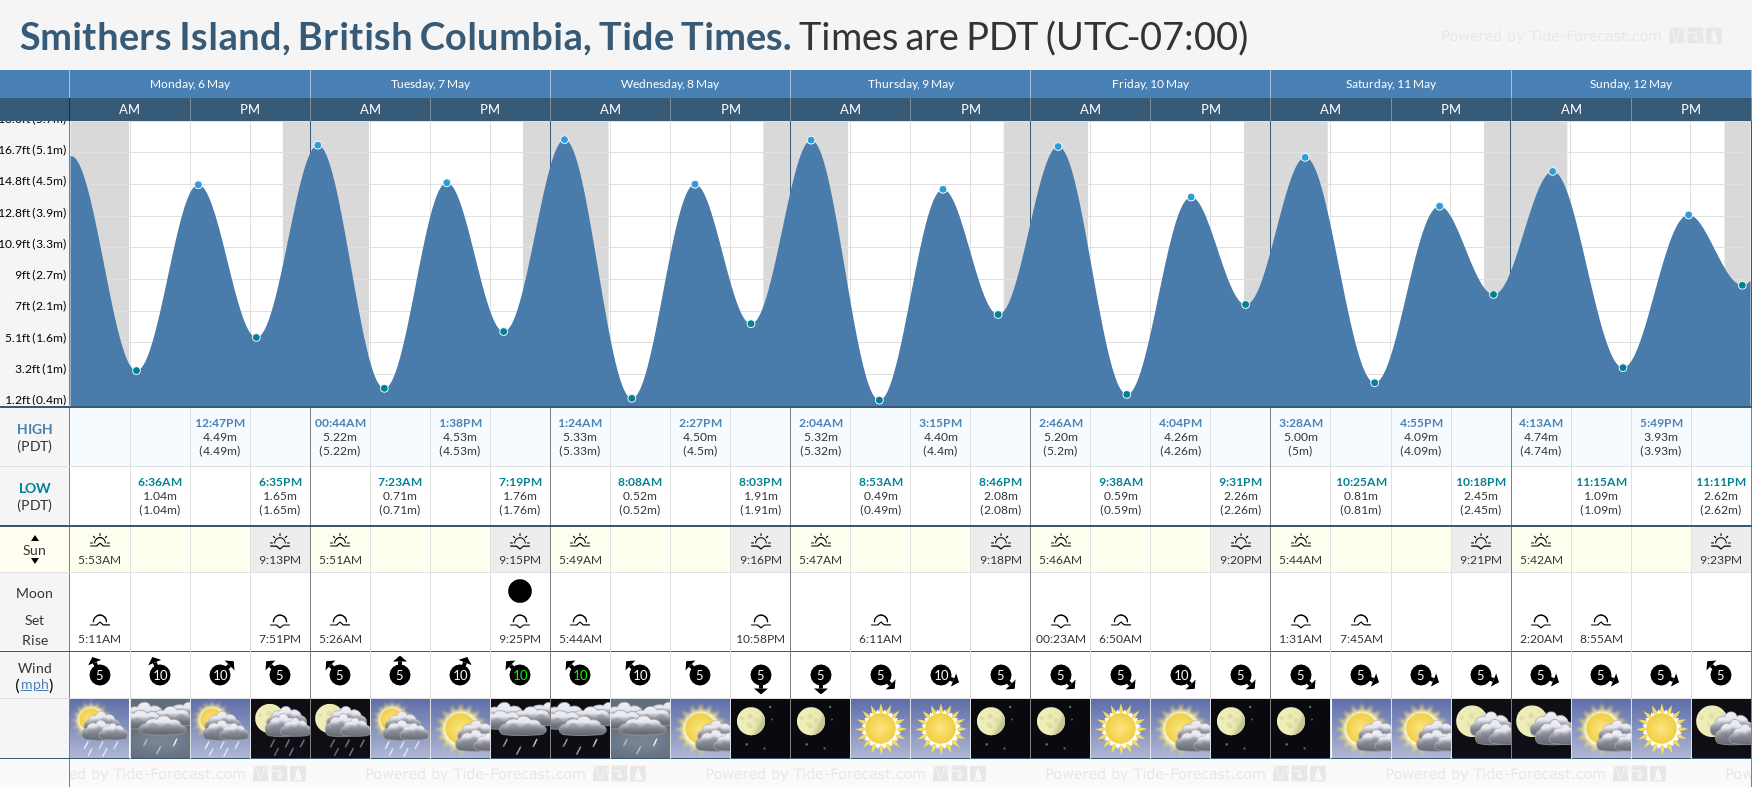 Smithers Island, British Columbia Tide Chart including high and low tide tide times for the next 7 days